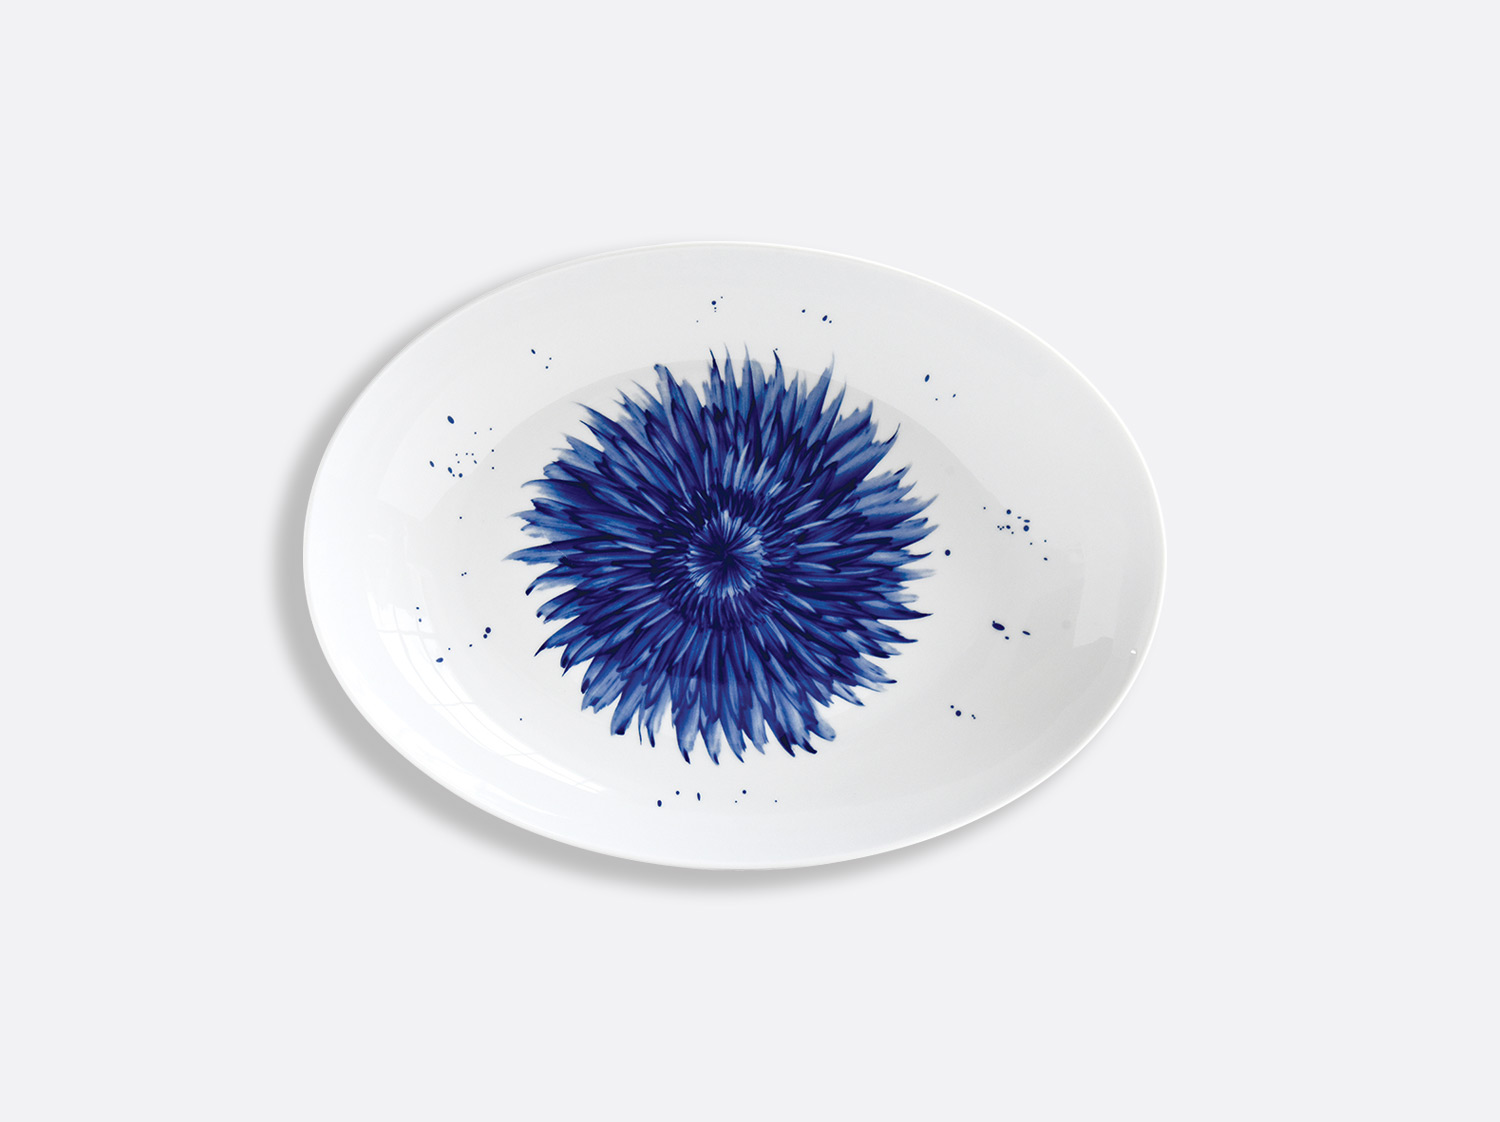 China Deep oval platter 15.4'' x 11'' of the collection IN BLOOM - Zemer Peled | Bernardaud